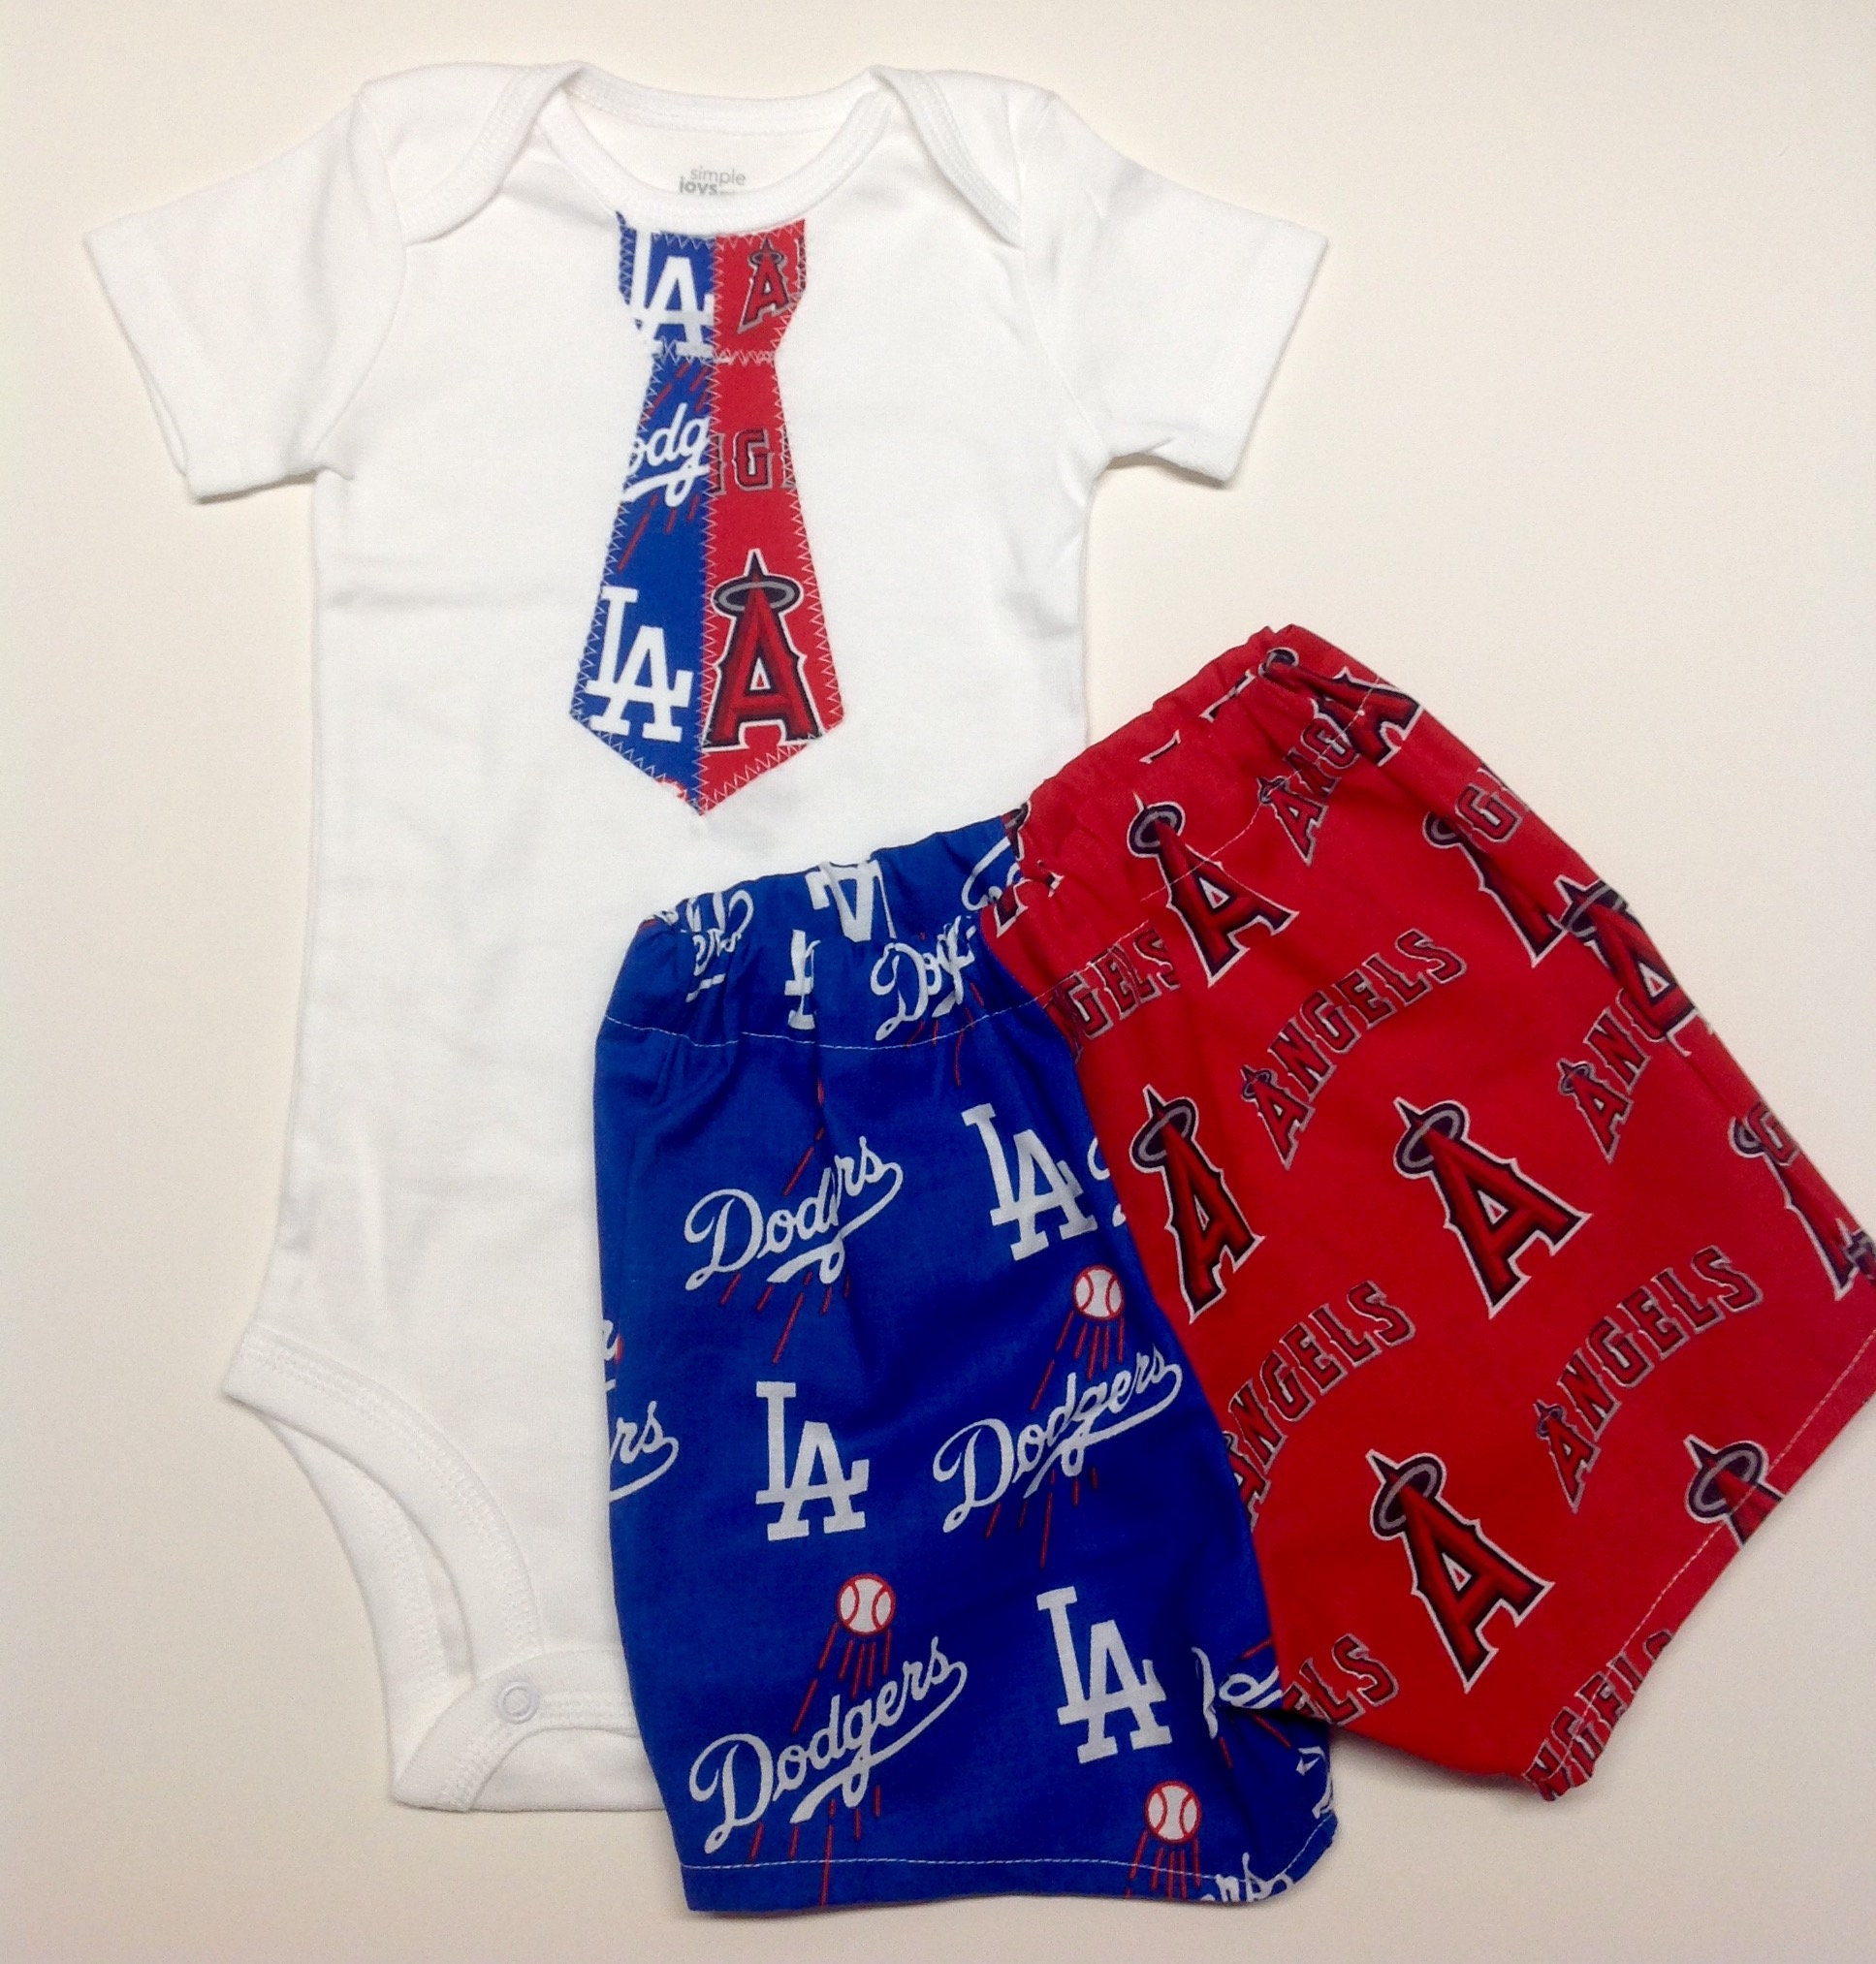 L.A Dodgers Outfit Top New Born 6-9M Girls Baby NWT 3 Pieces